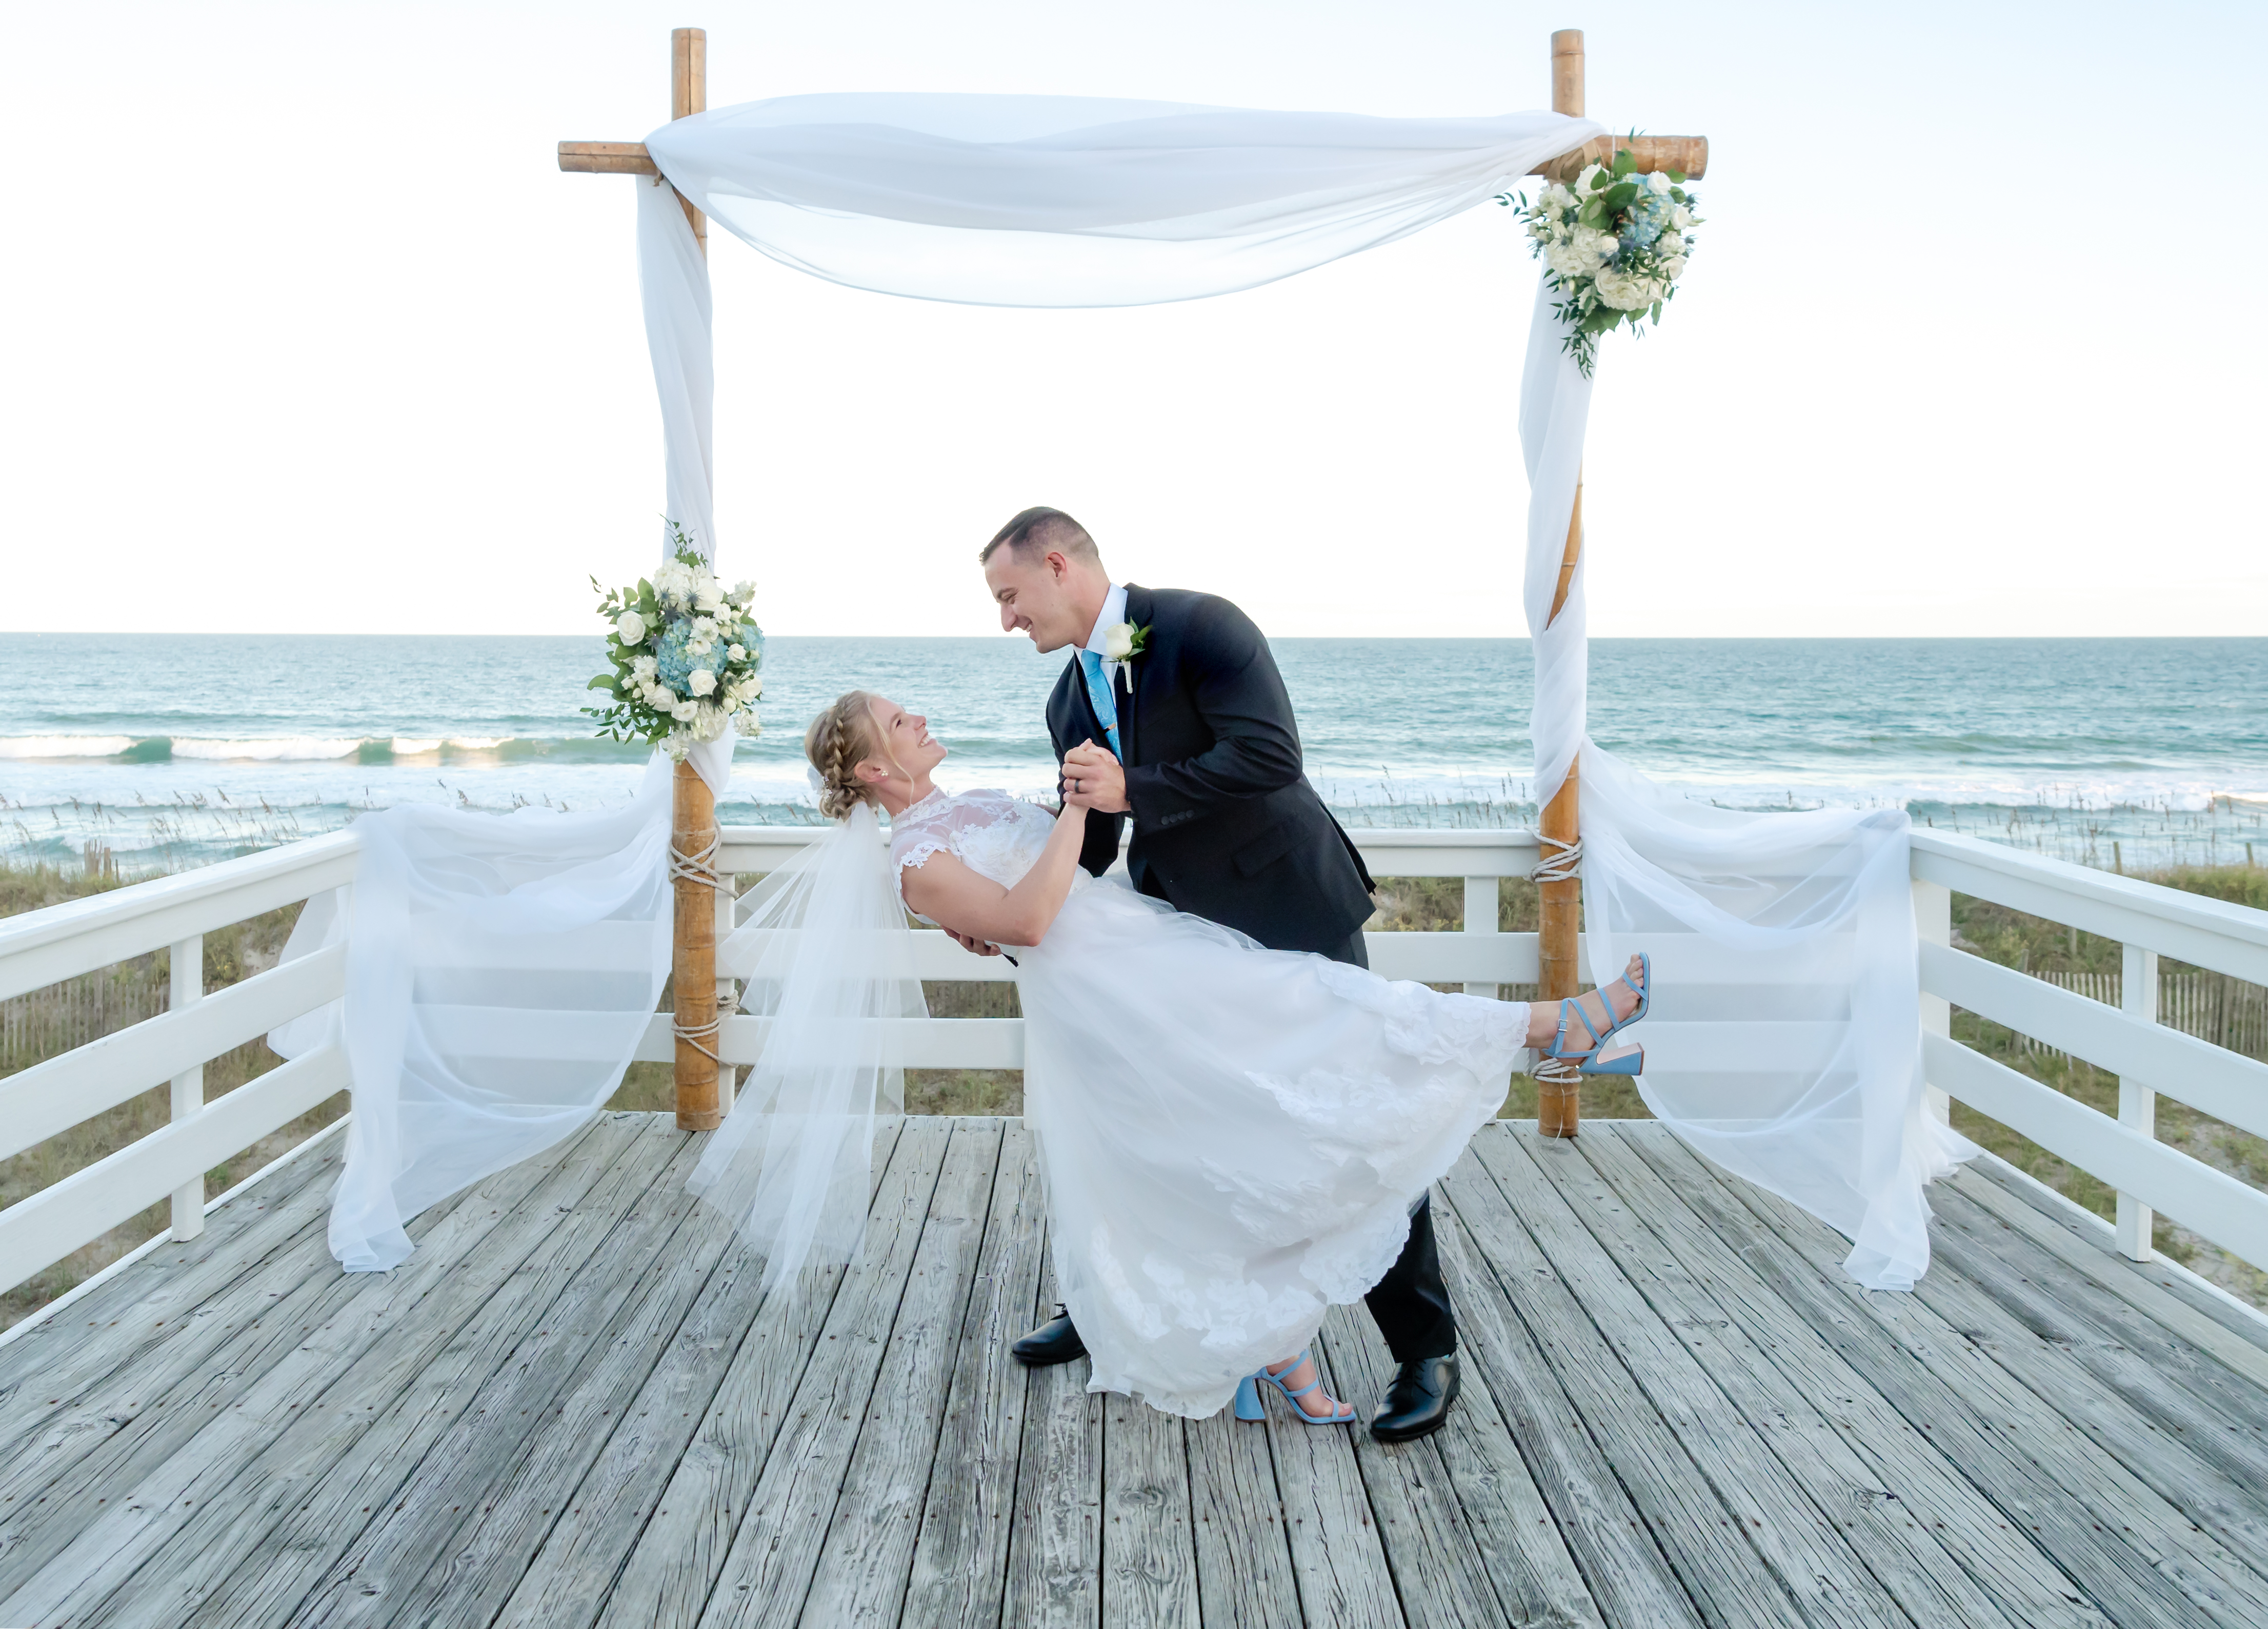 Groom dipping bride on a deck at the beach.